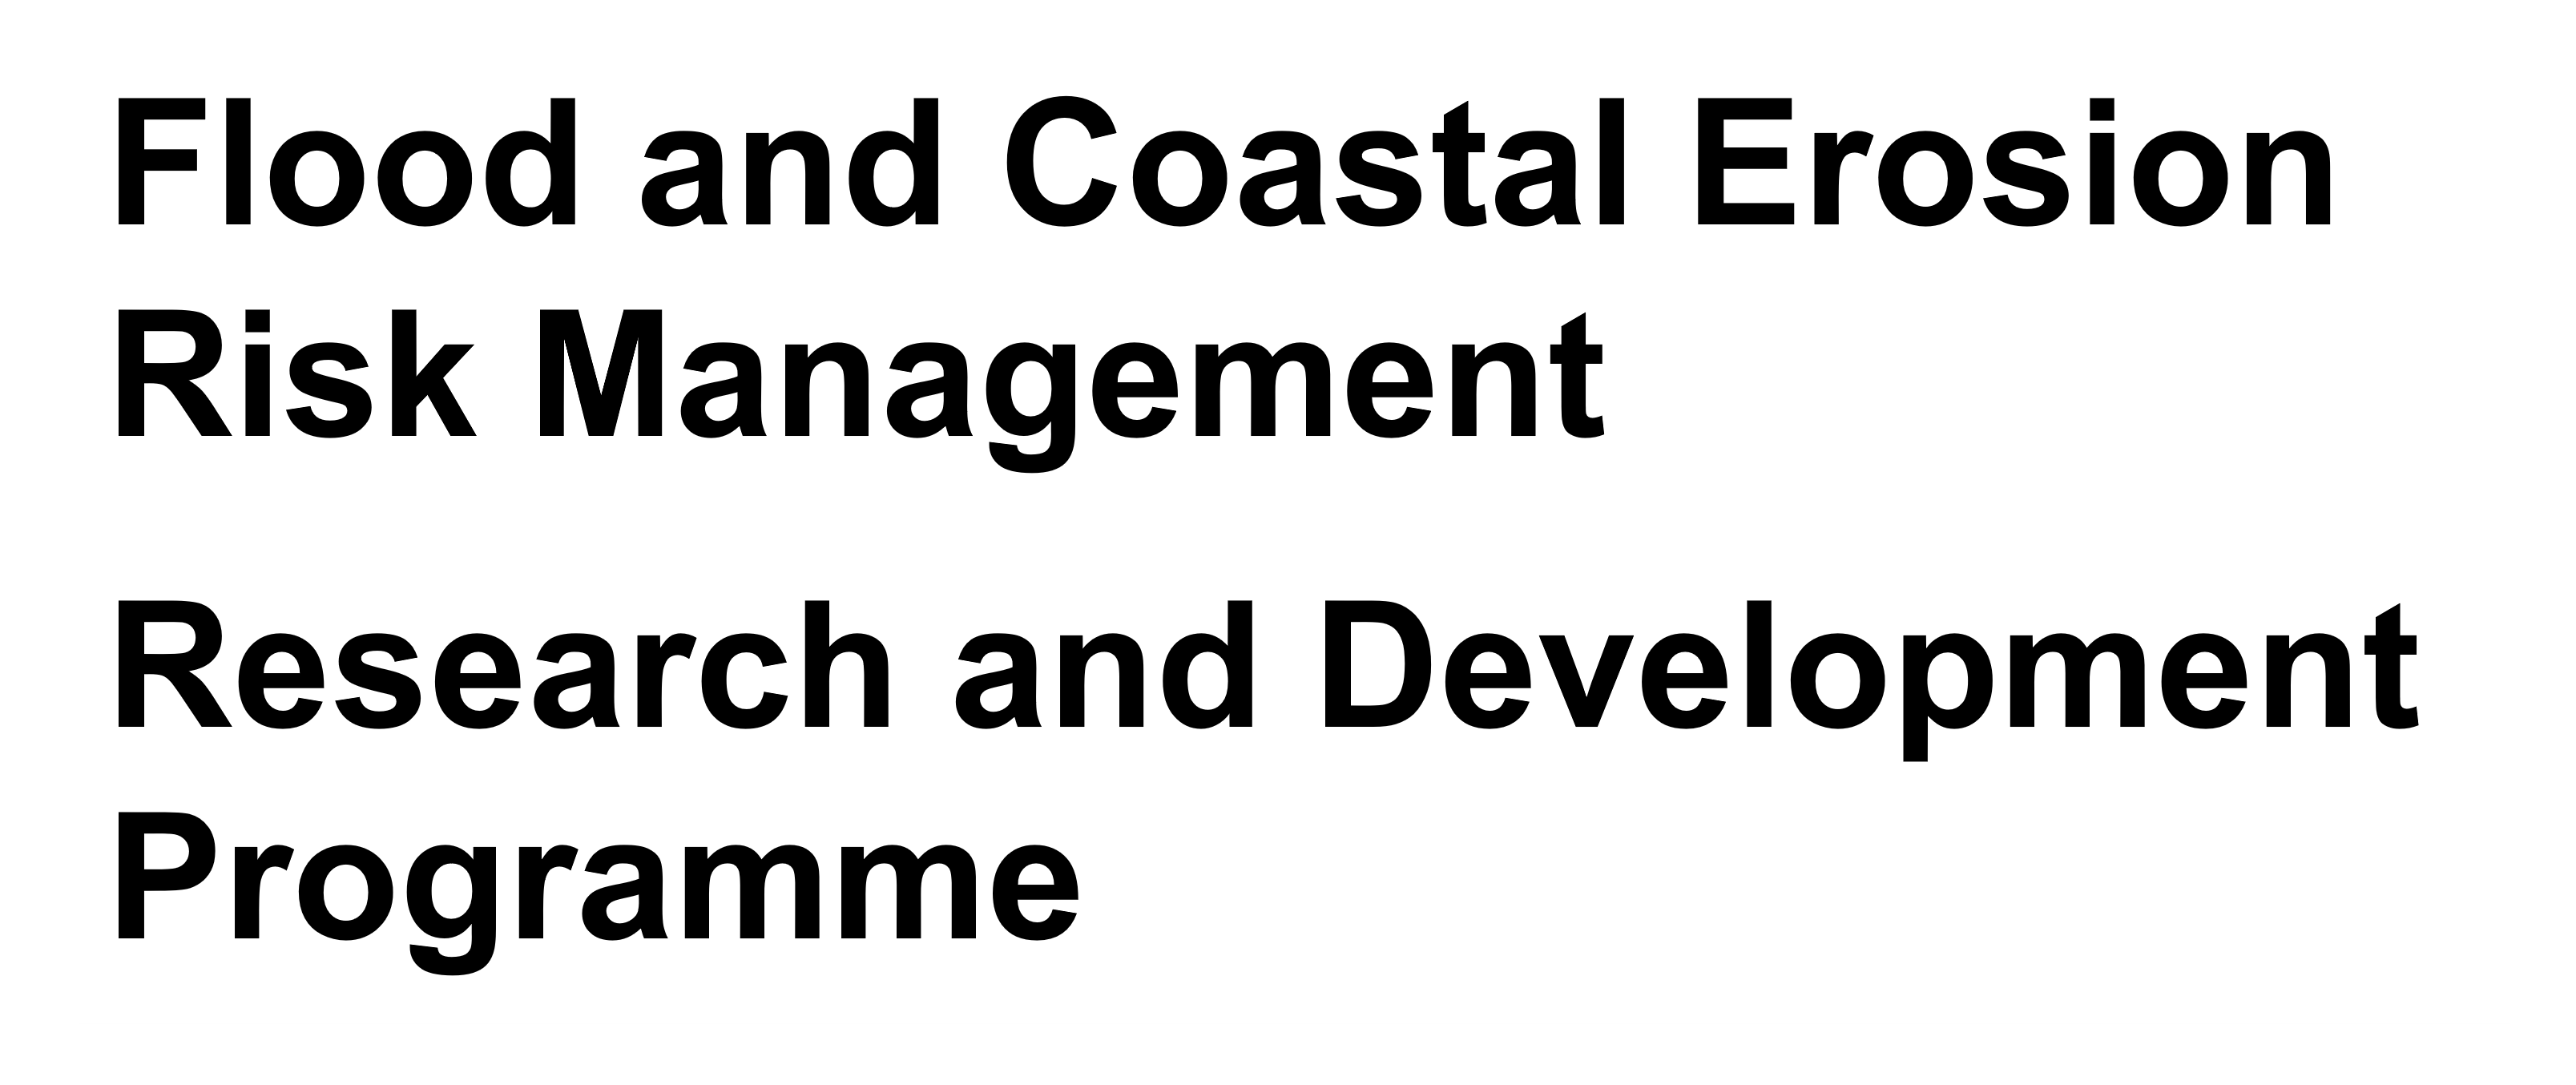 Flood and Coastal Erosion Risk Management Research and Development Programme